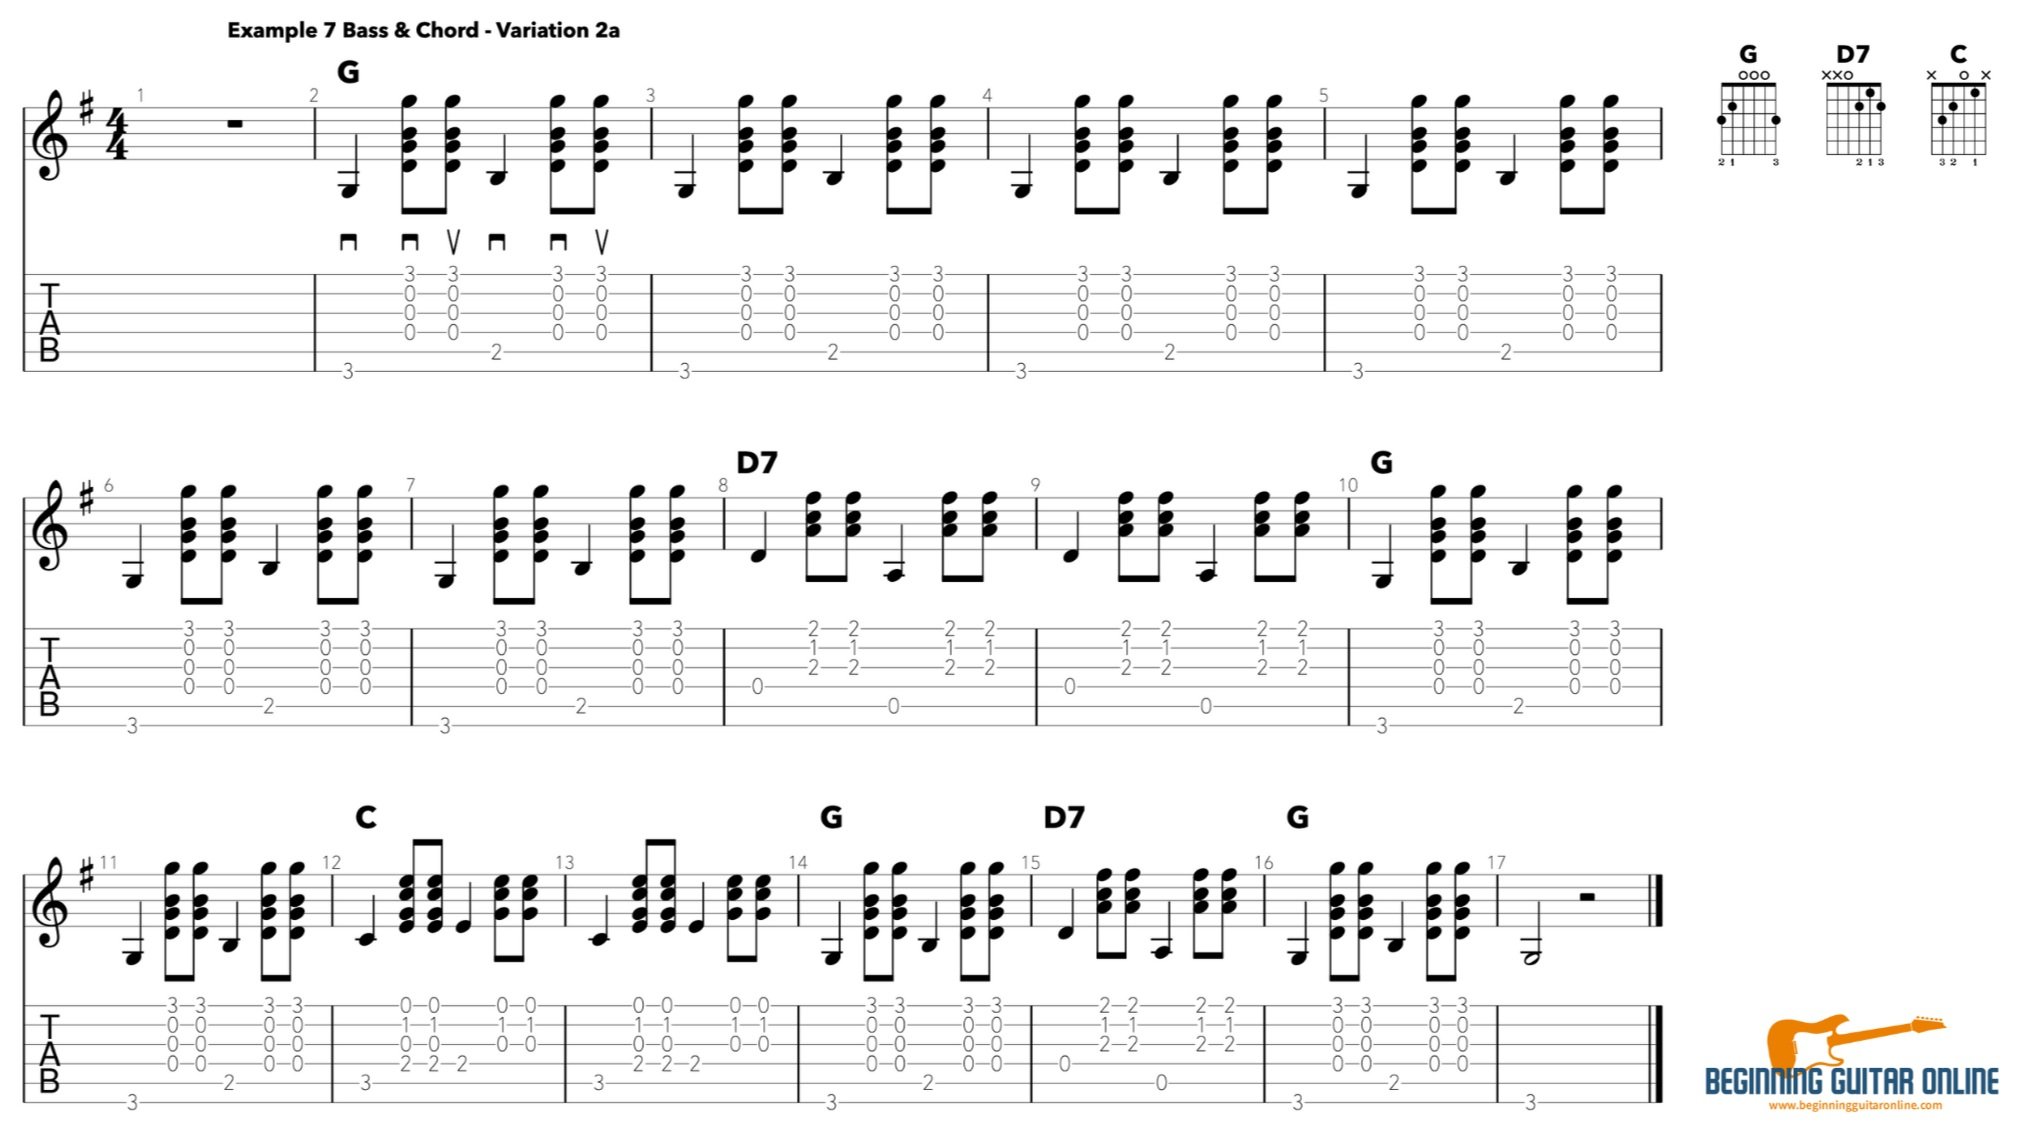 When The Saints Go Marching In (Guitar Chords/Lyrics) - Sheet Music